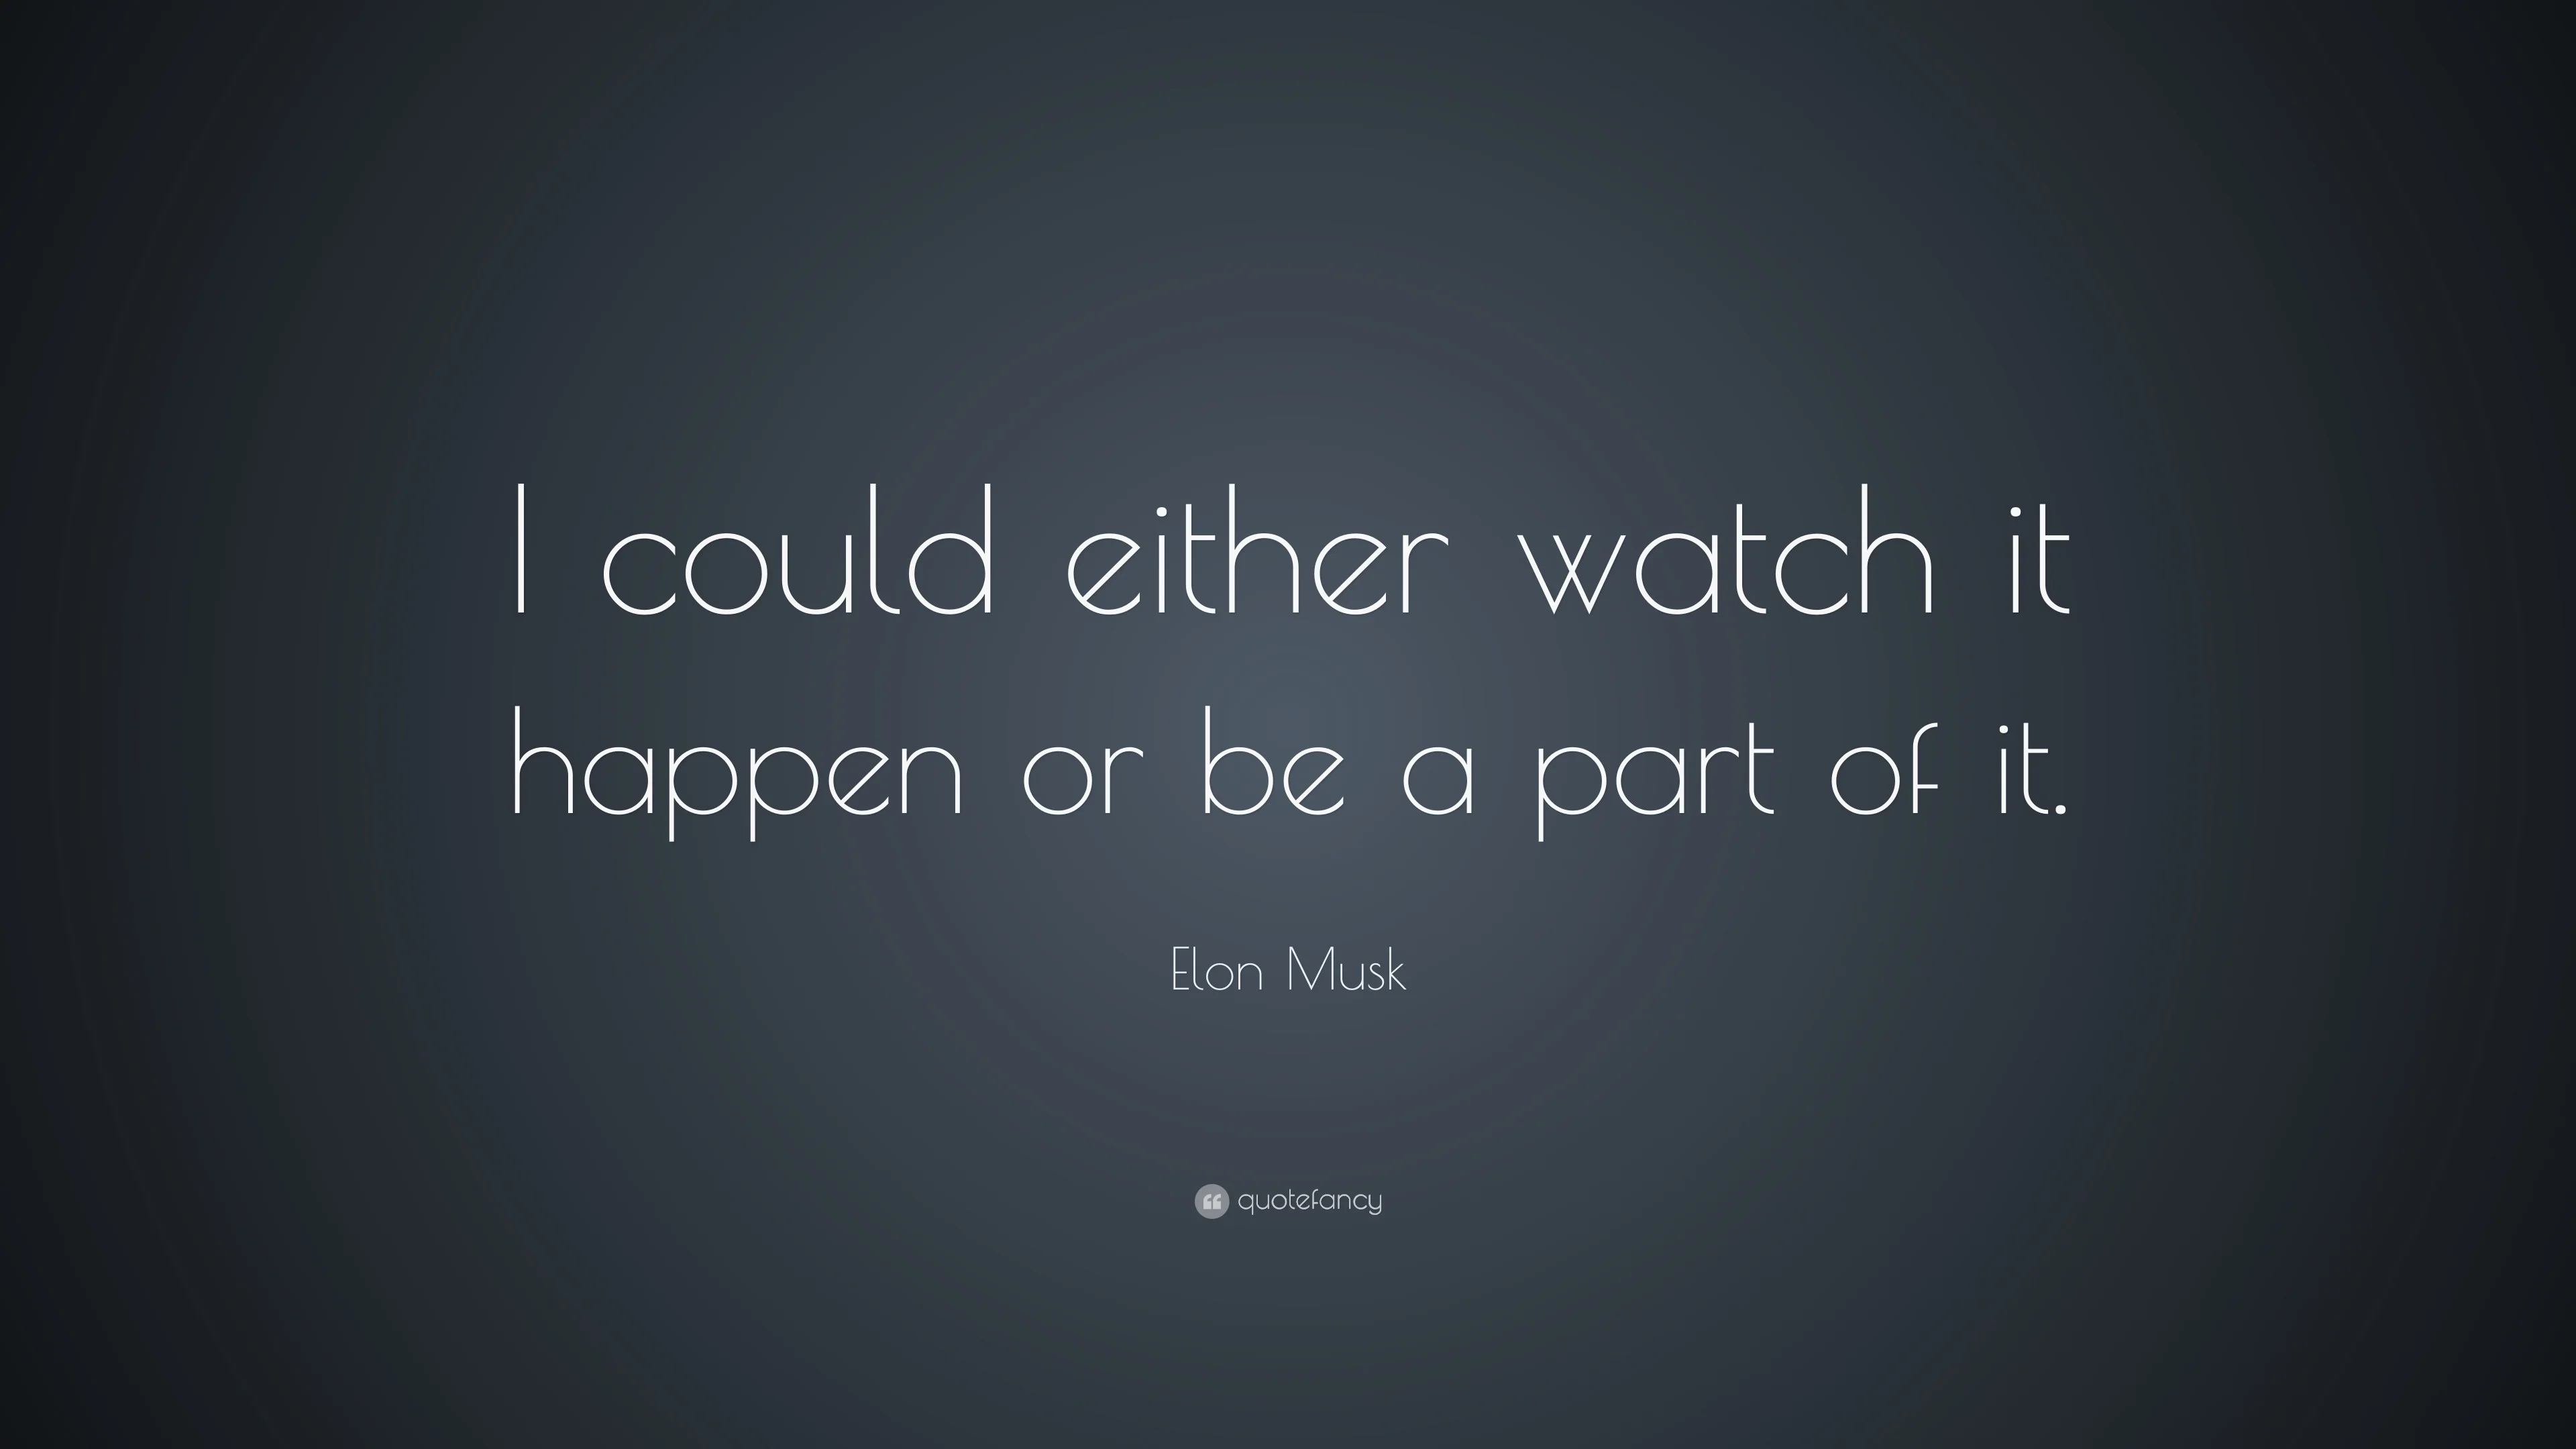 Elon Musk Quote I could either watch it happen or be a part of